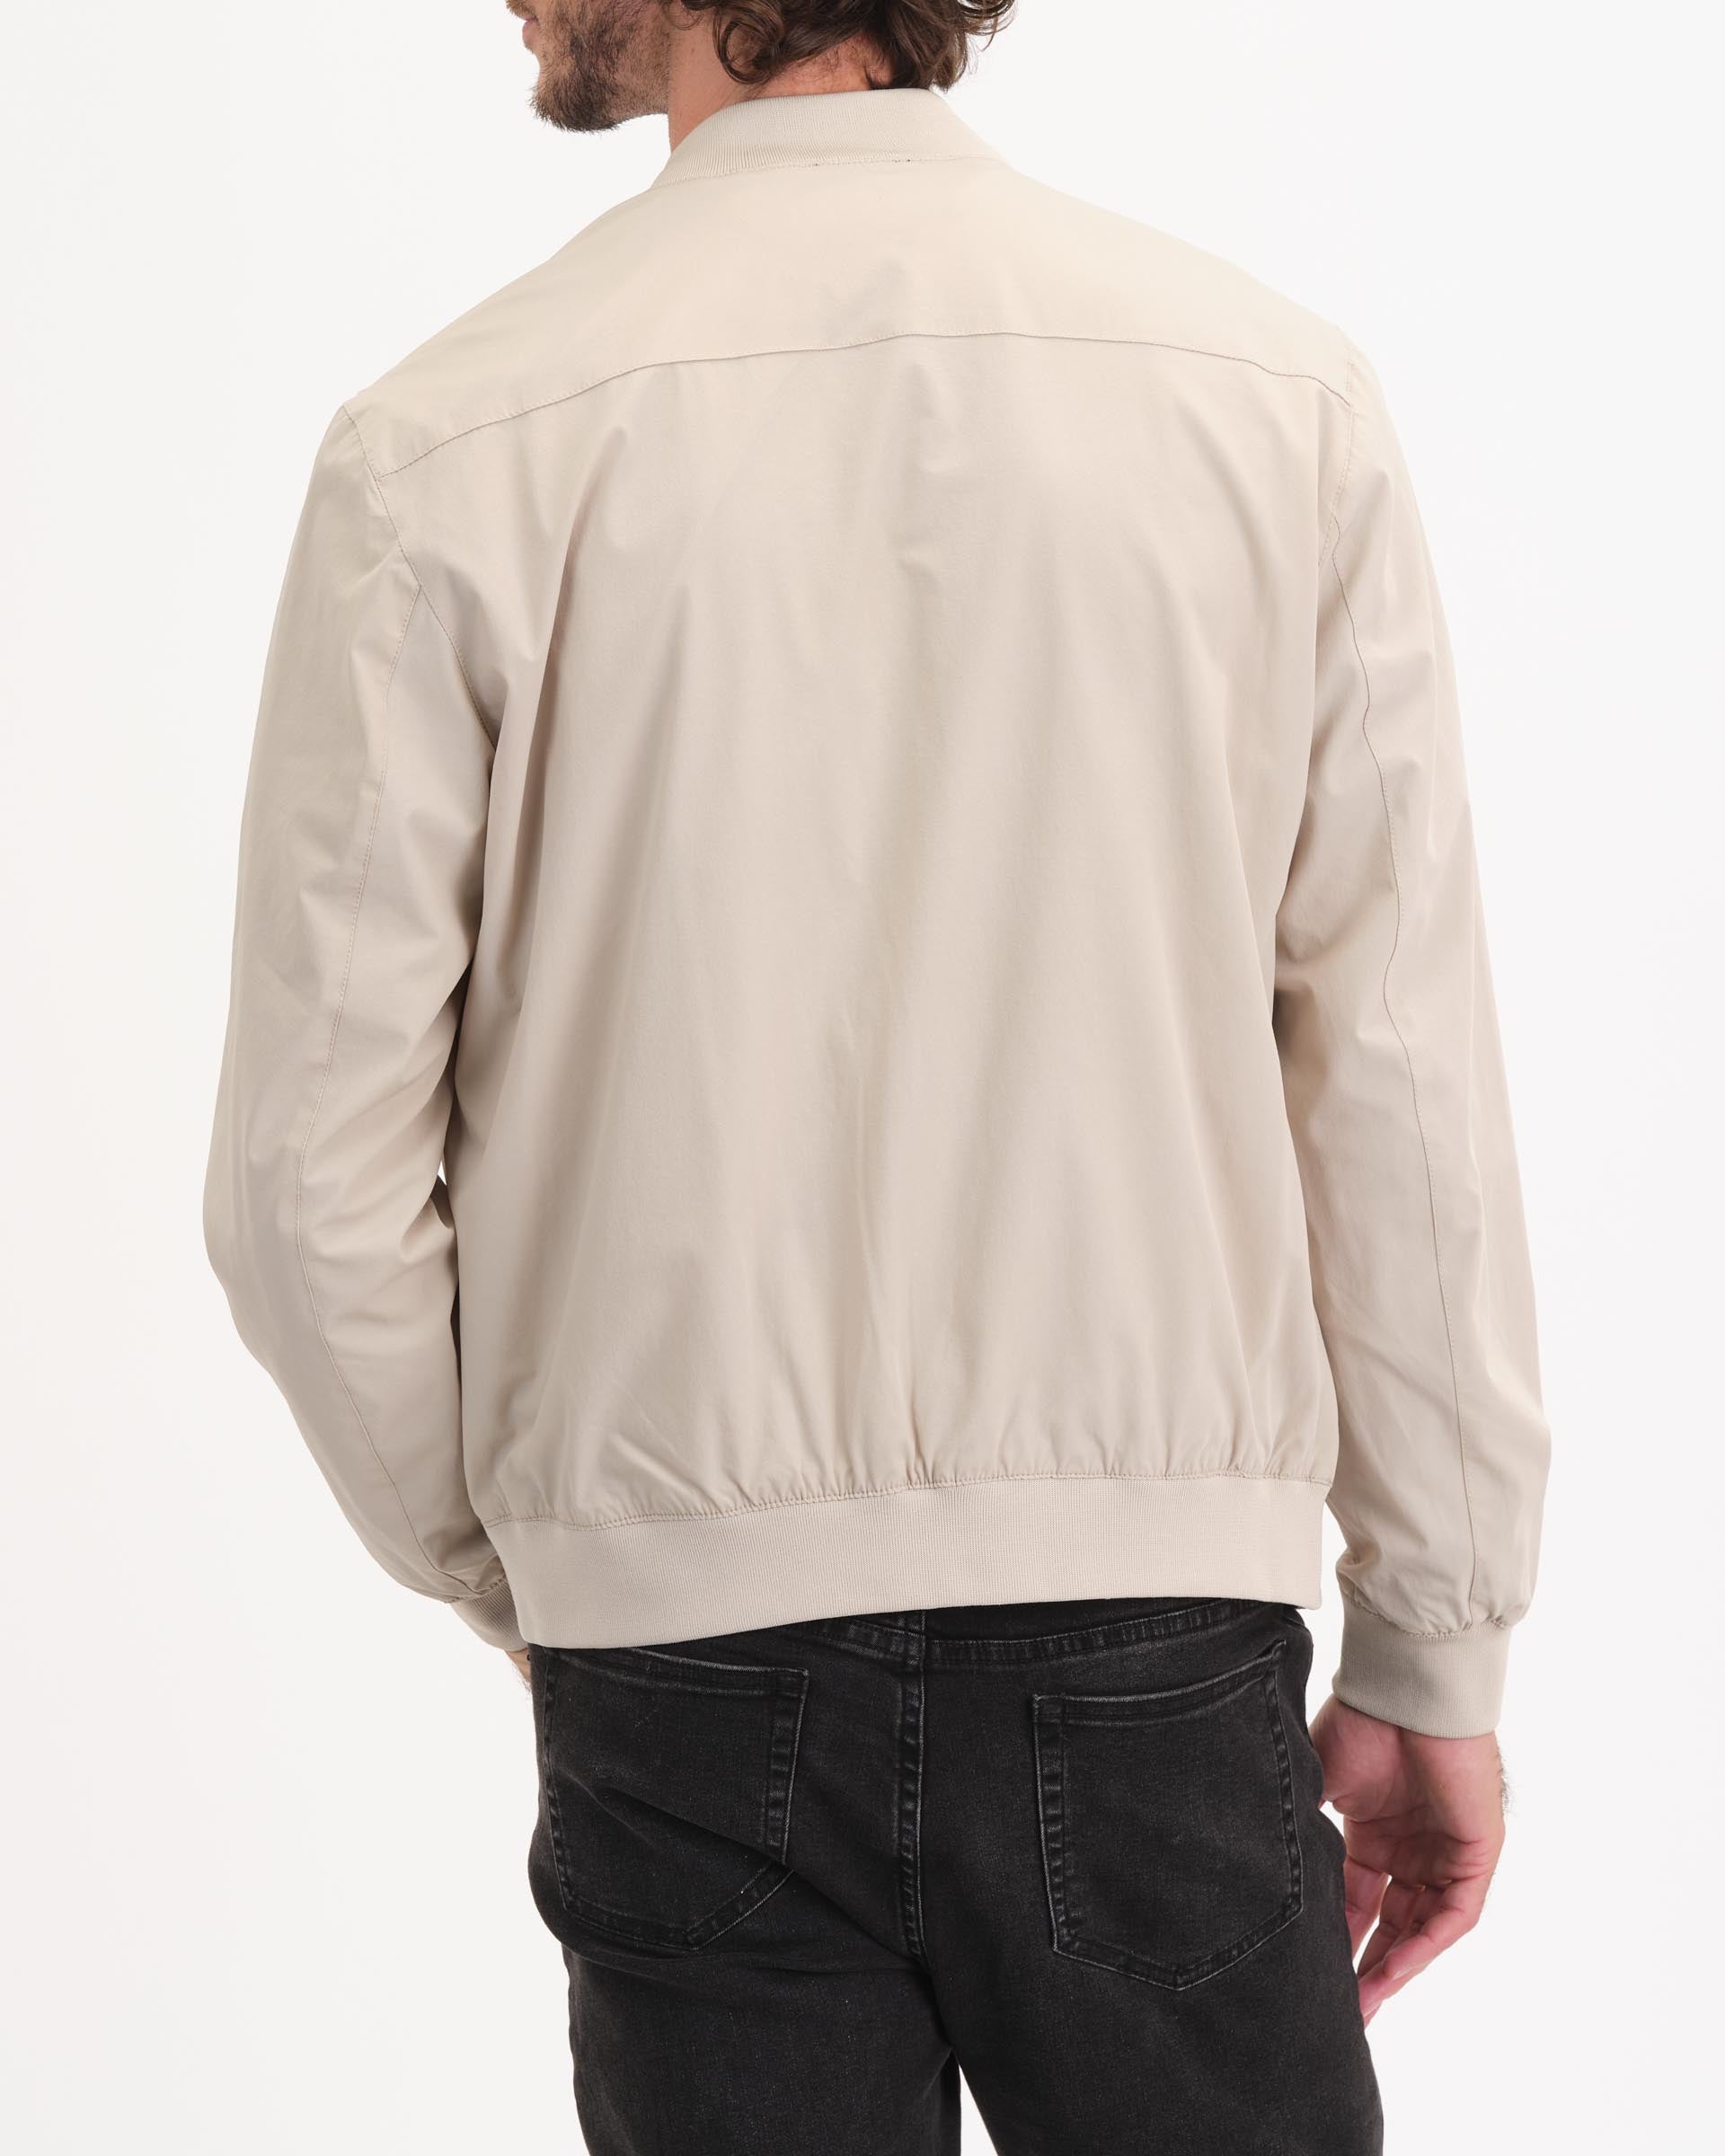 Paloma Quilted Gauze Fabric Bomber Jacket in Cream – Shop at Goldie's